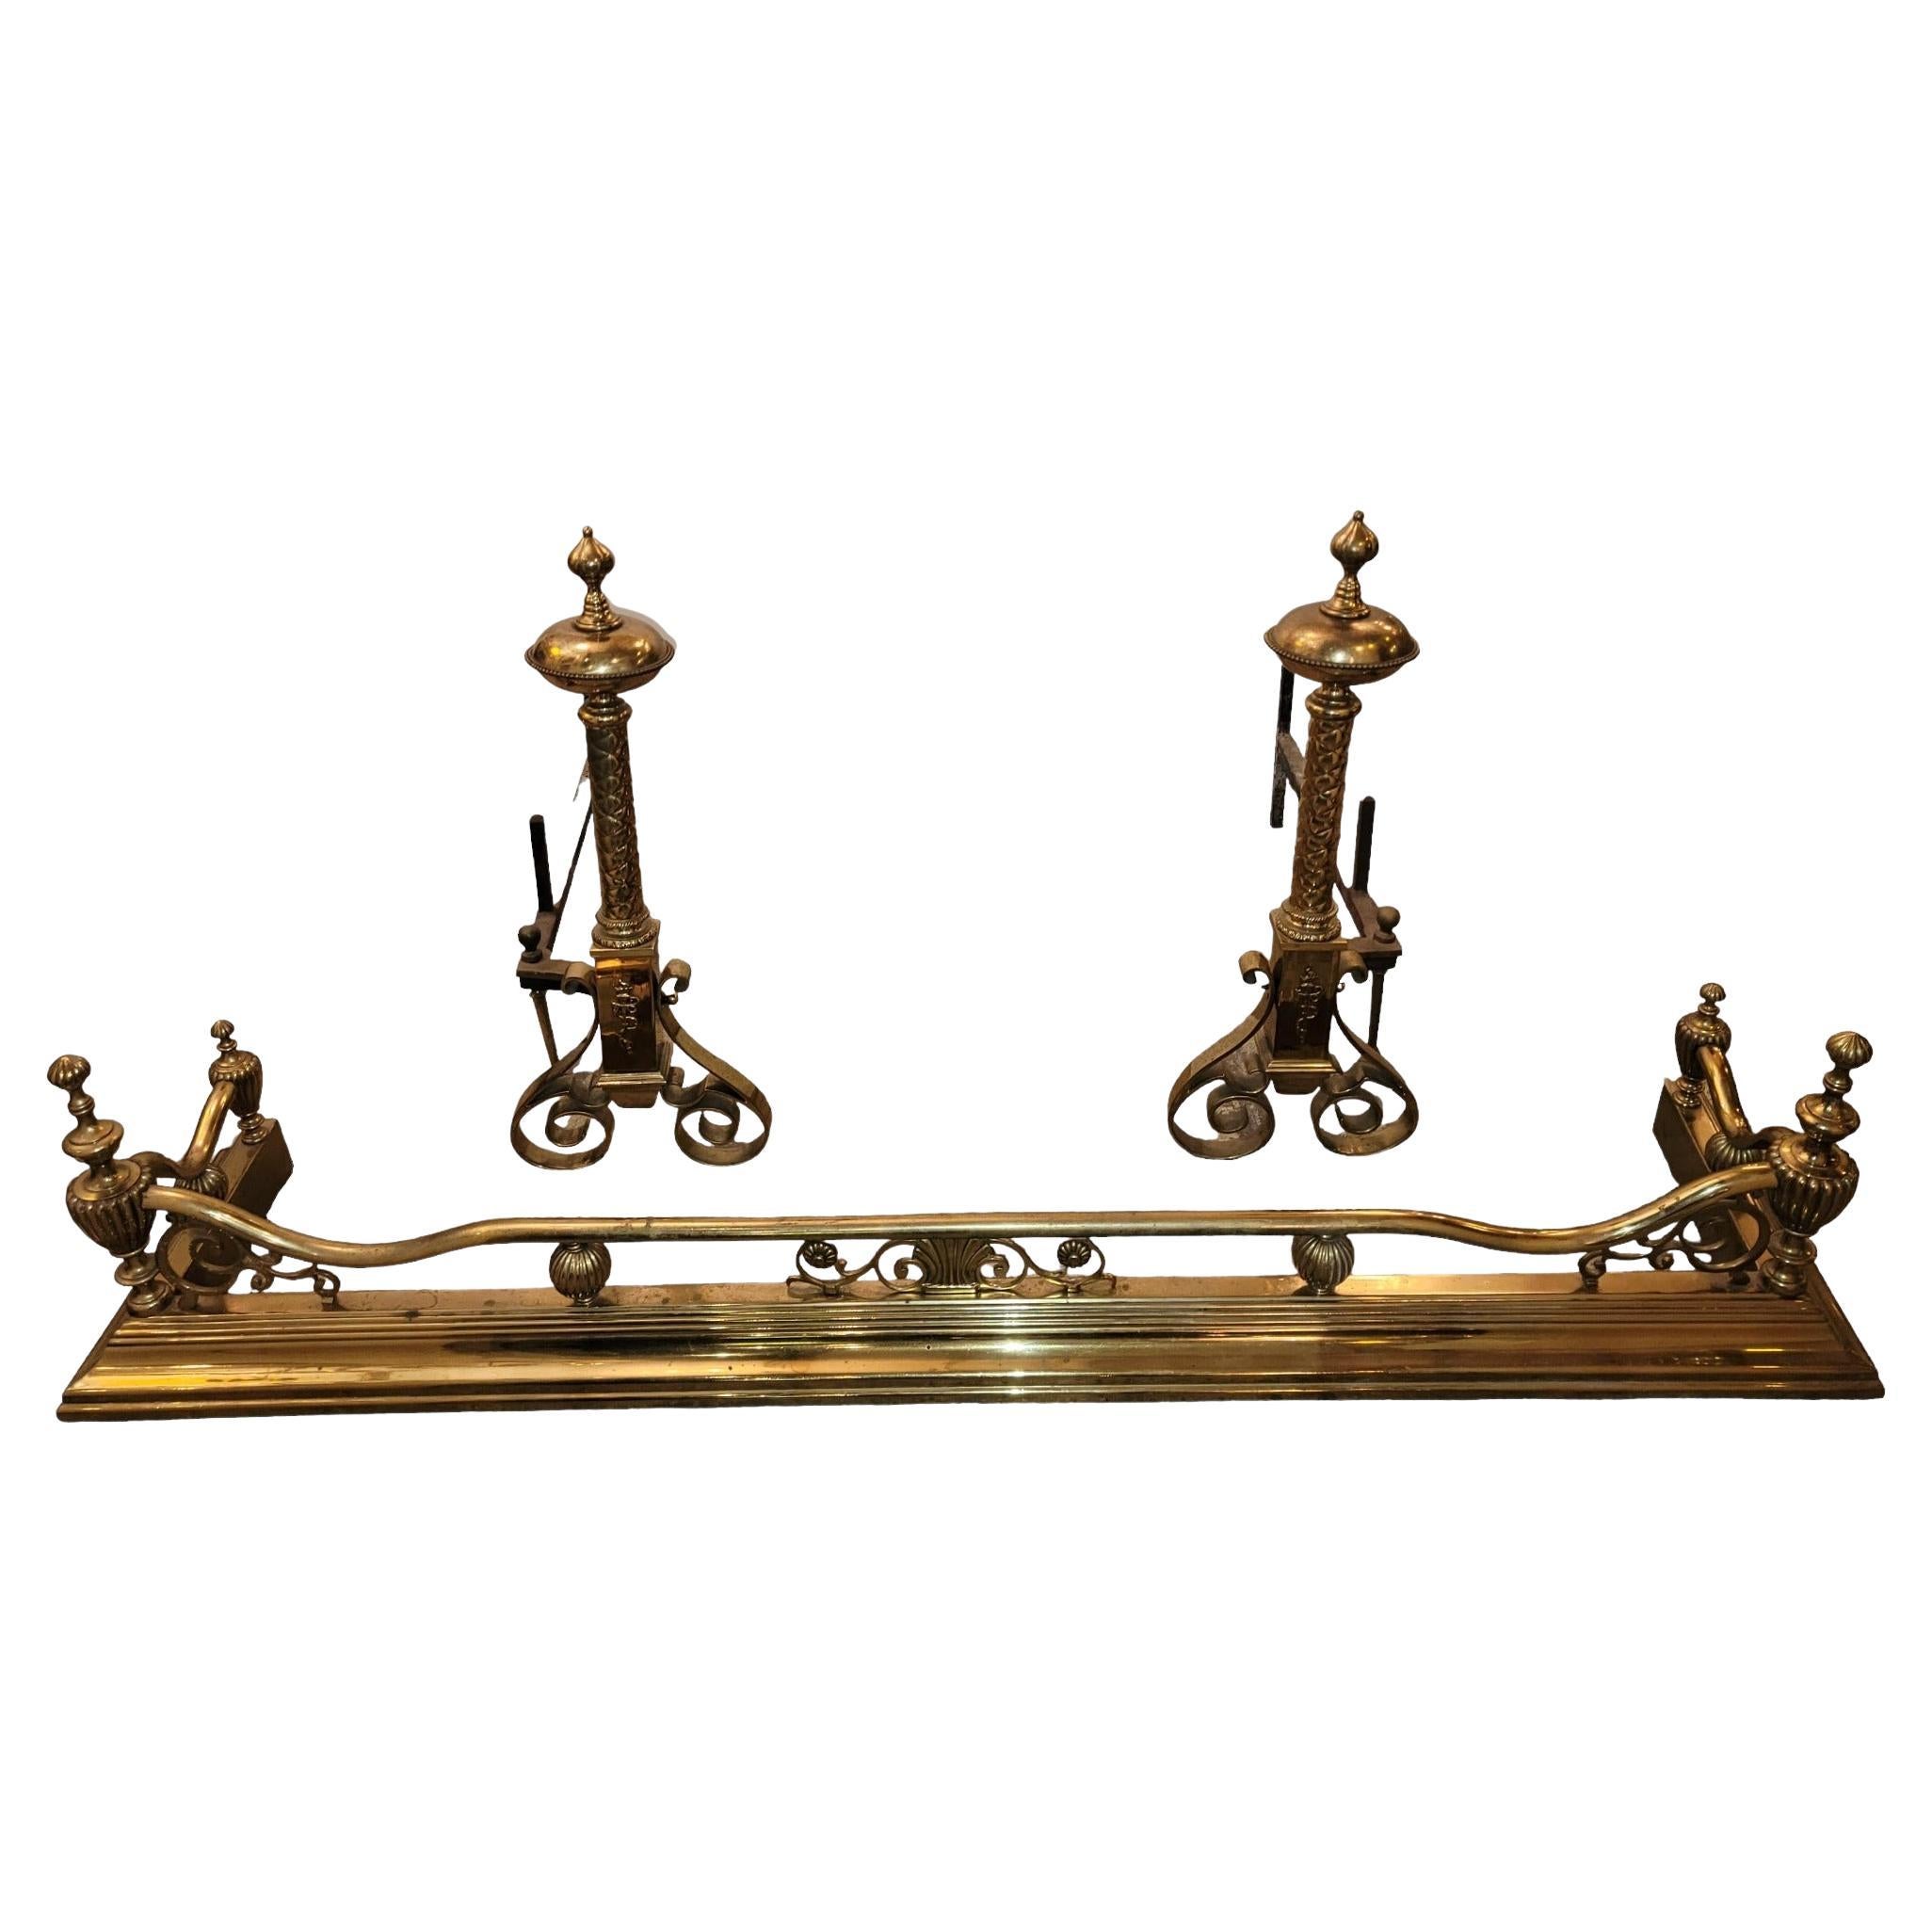 Early 20th Century Italian Fireplace Andiron and Chenet, 3 Piece Set For Sale